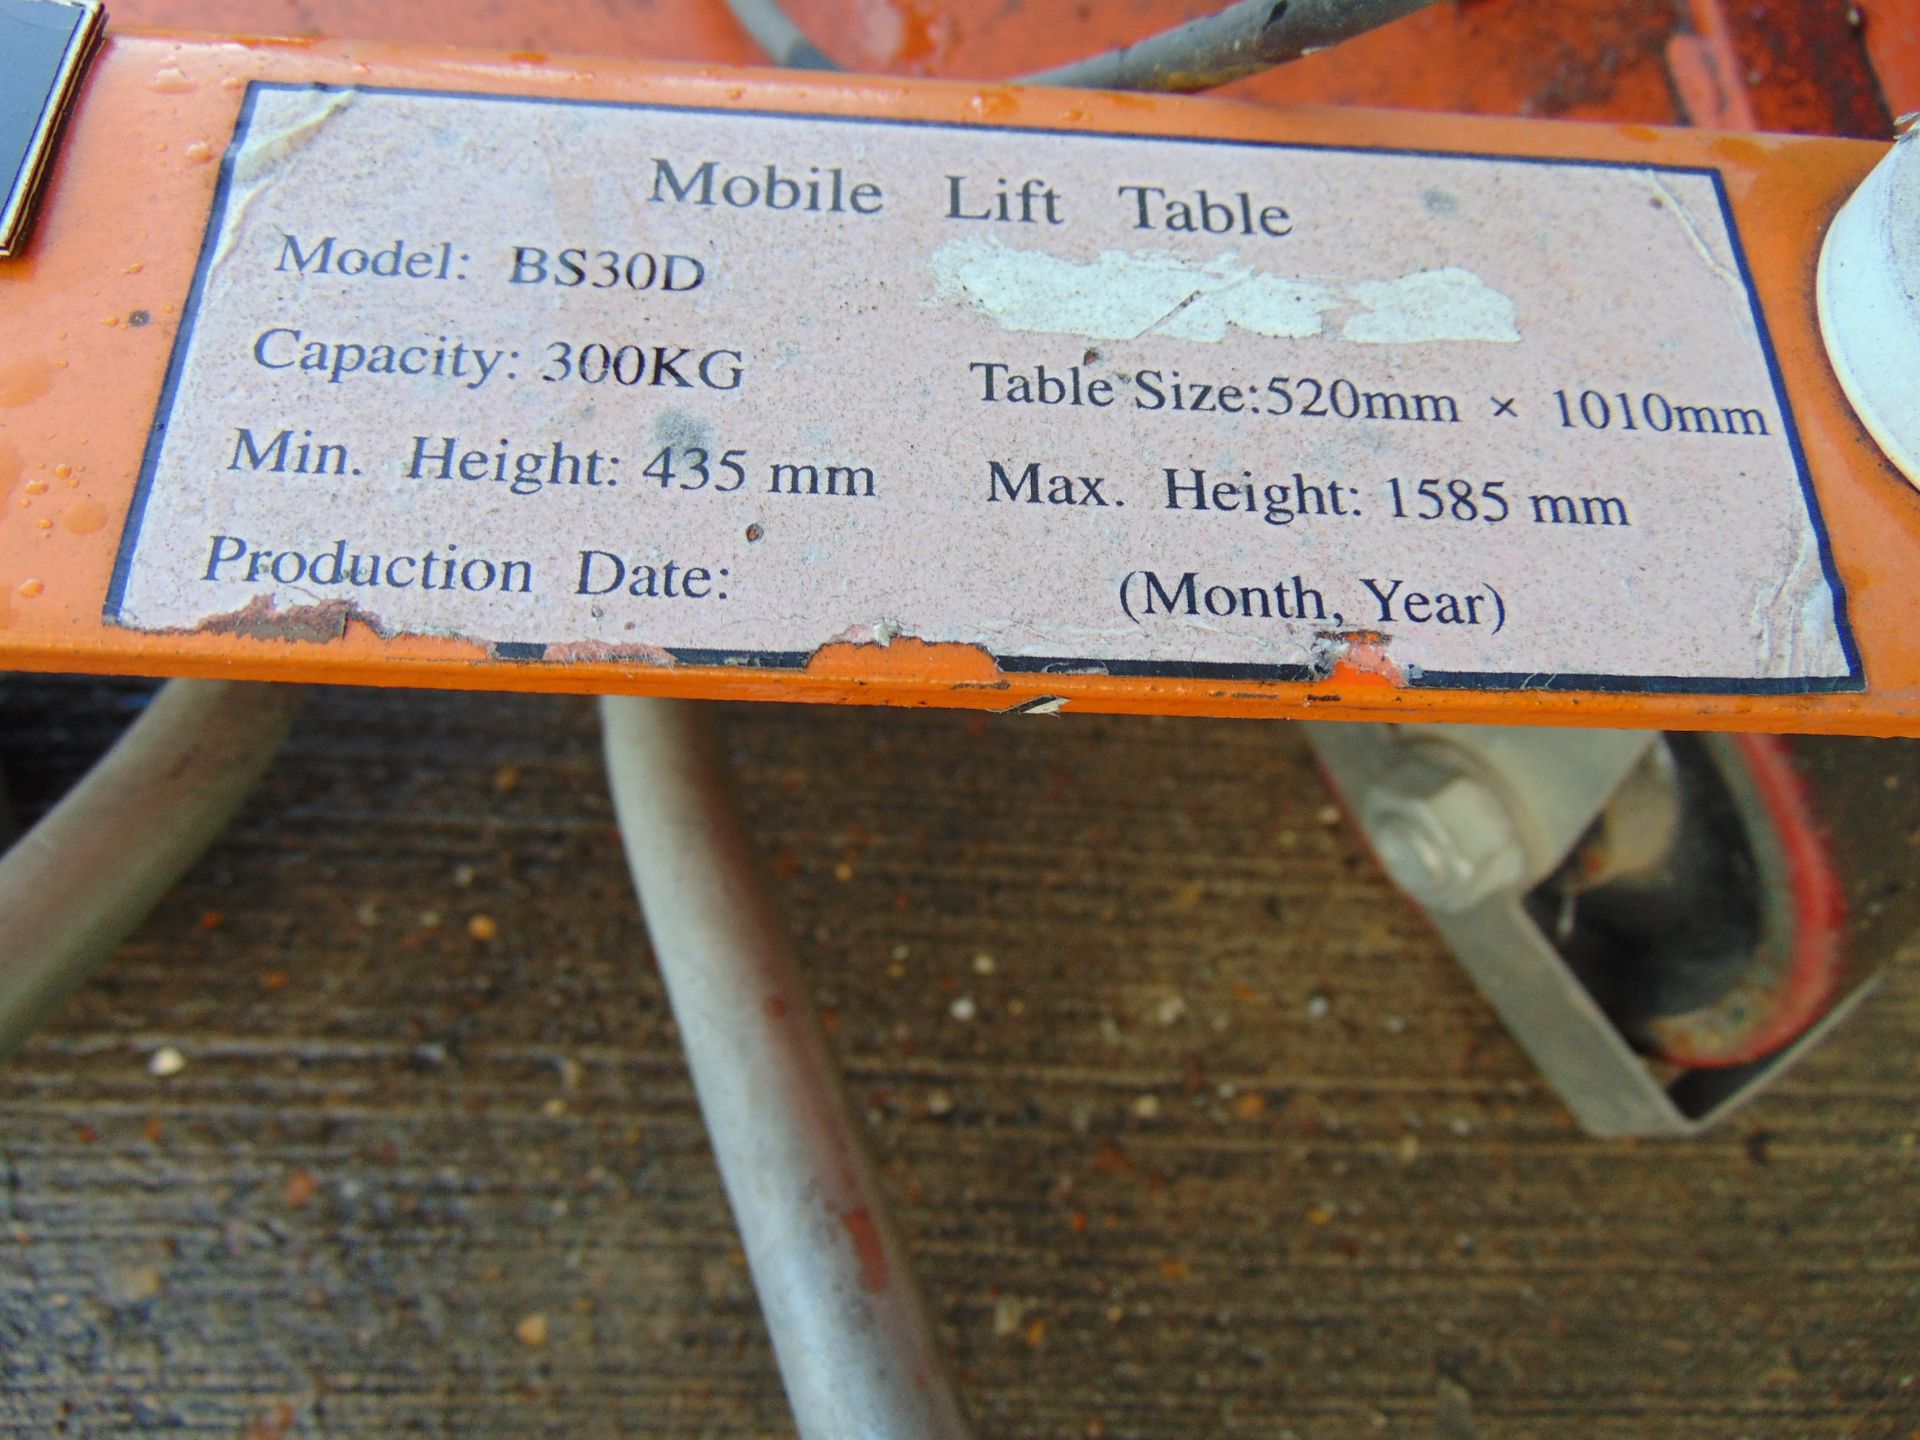 Mobile Lift Table - Image 8 of 9